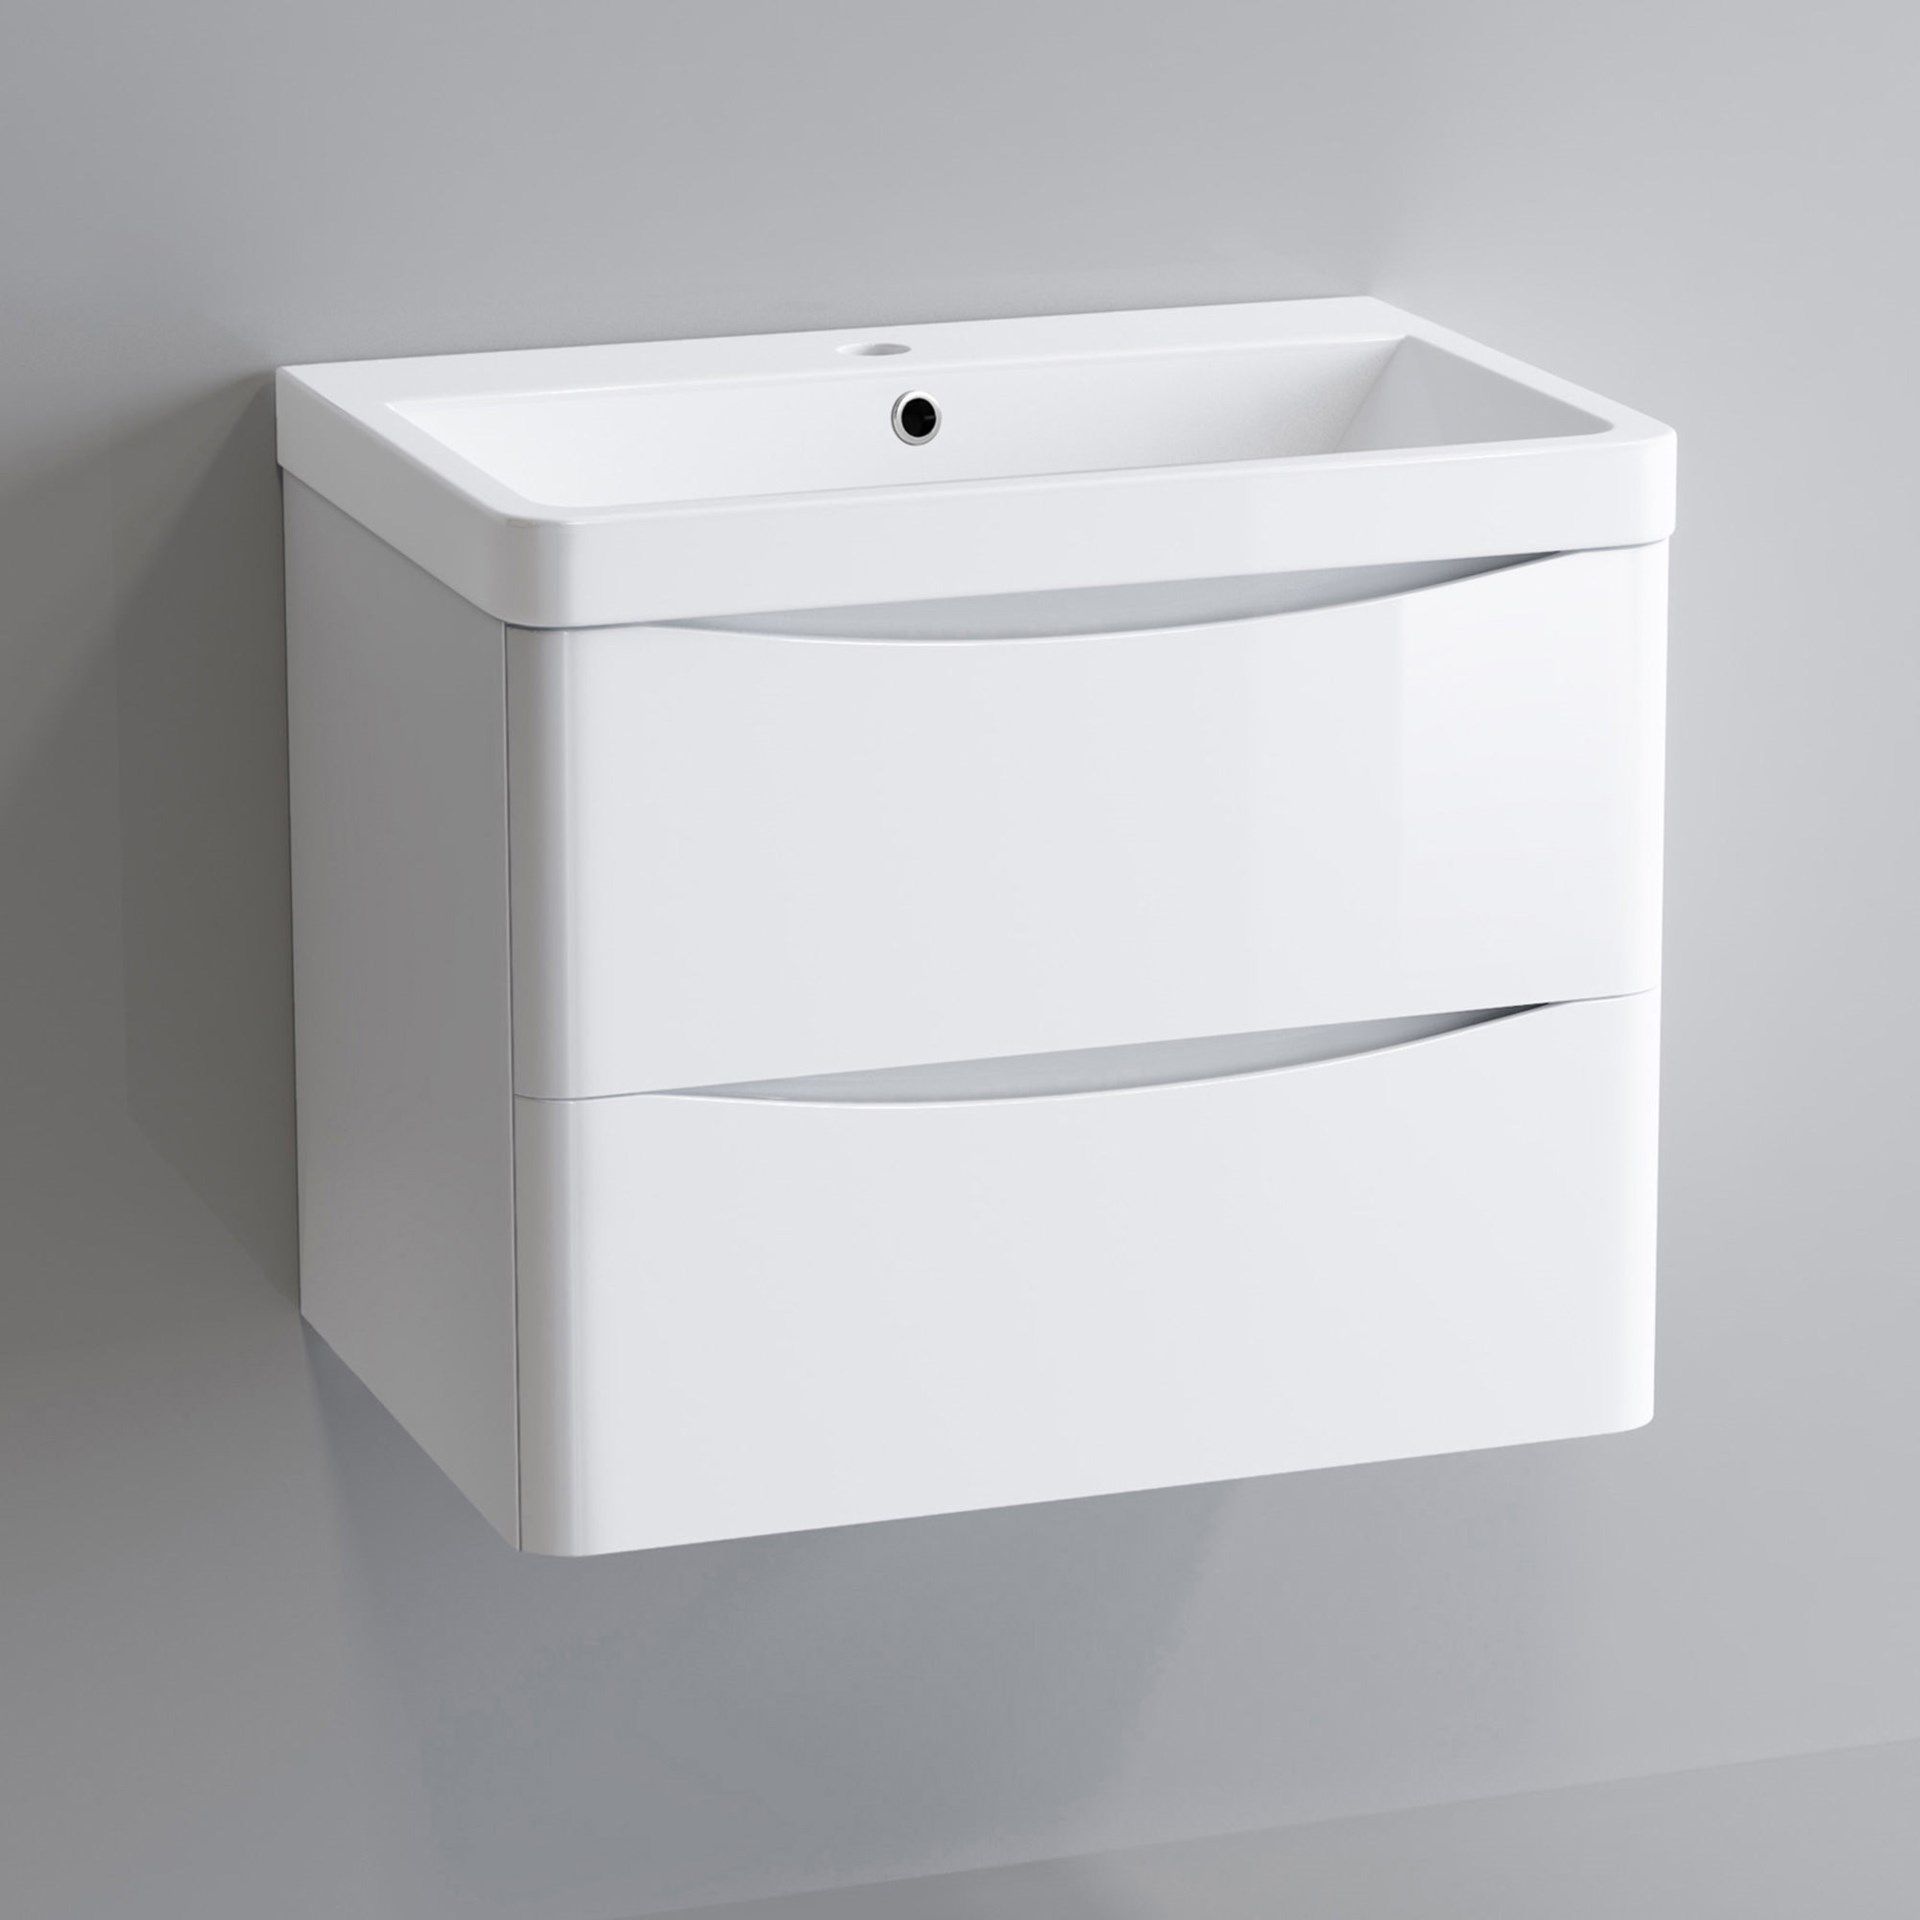 BRAND NEW BOXED 600mm Austin II Gloss White Built In Basin Drawer Unit - Wall Hung.RRP £849.99.Comes - Image 3 of 3